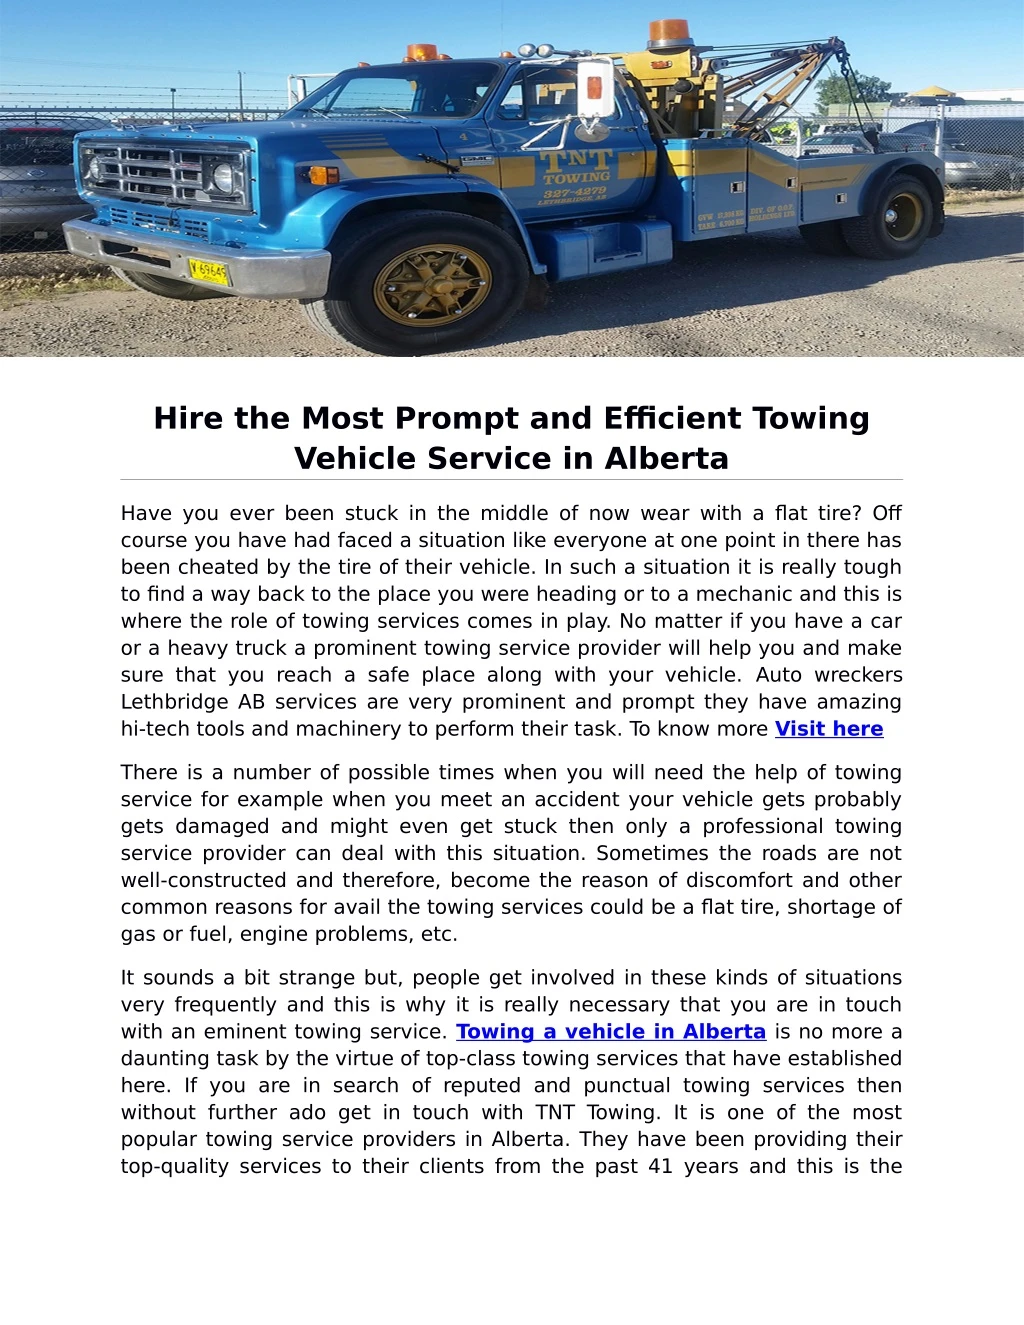 hire the most prompt and efficient towing vehicle